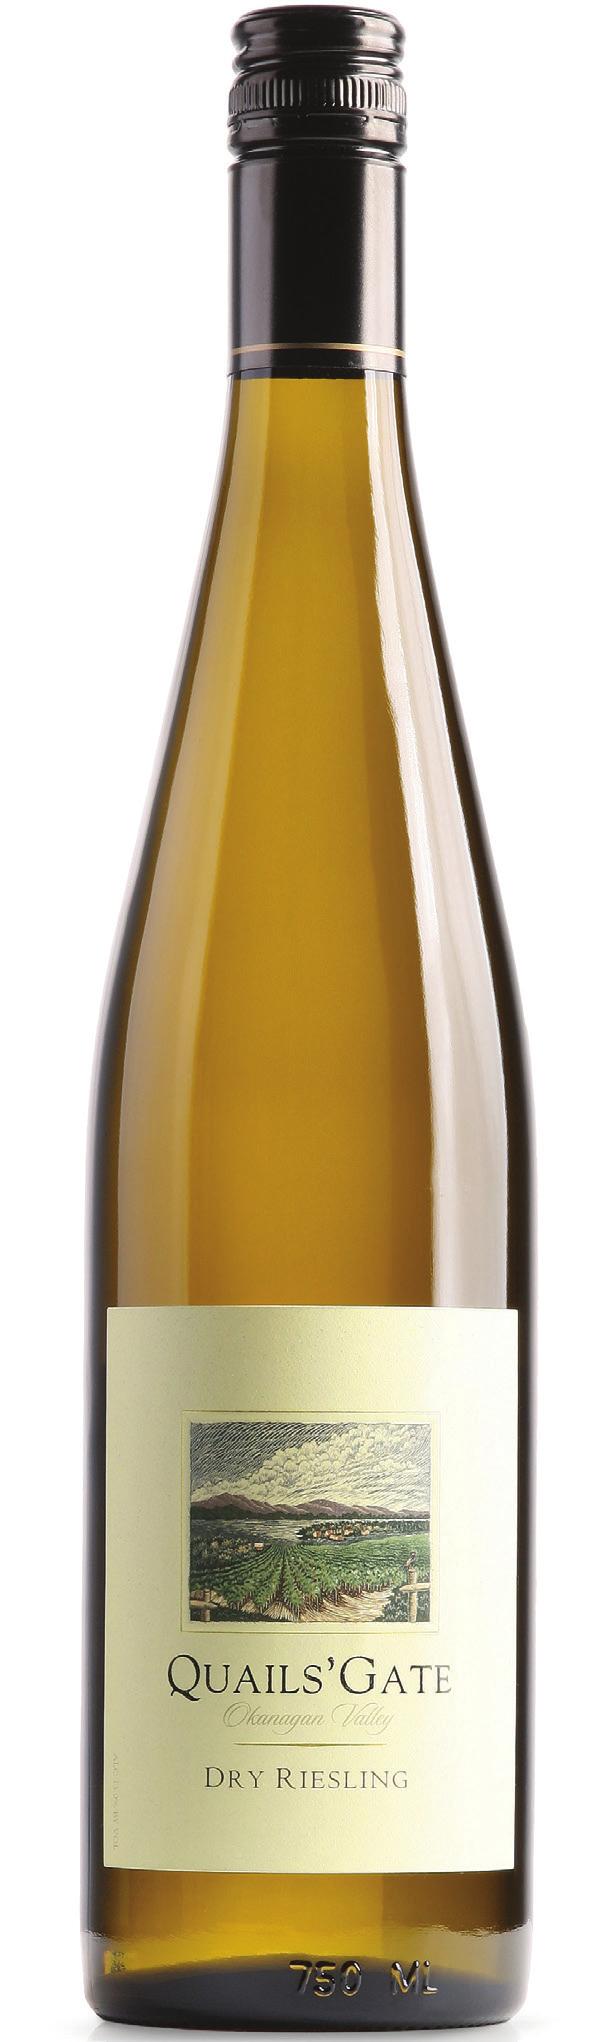 2016 DRY RIESLING Light-bodied with a poised complexity. Alluring aromas of spring blossoms and jasmine greet you on the nose, followed by the freshness of green apples and a lively lingering acidity.